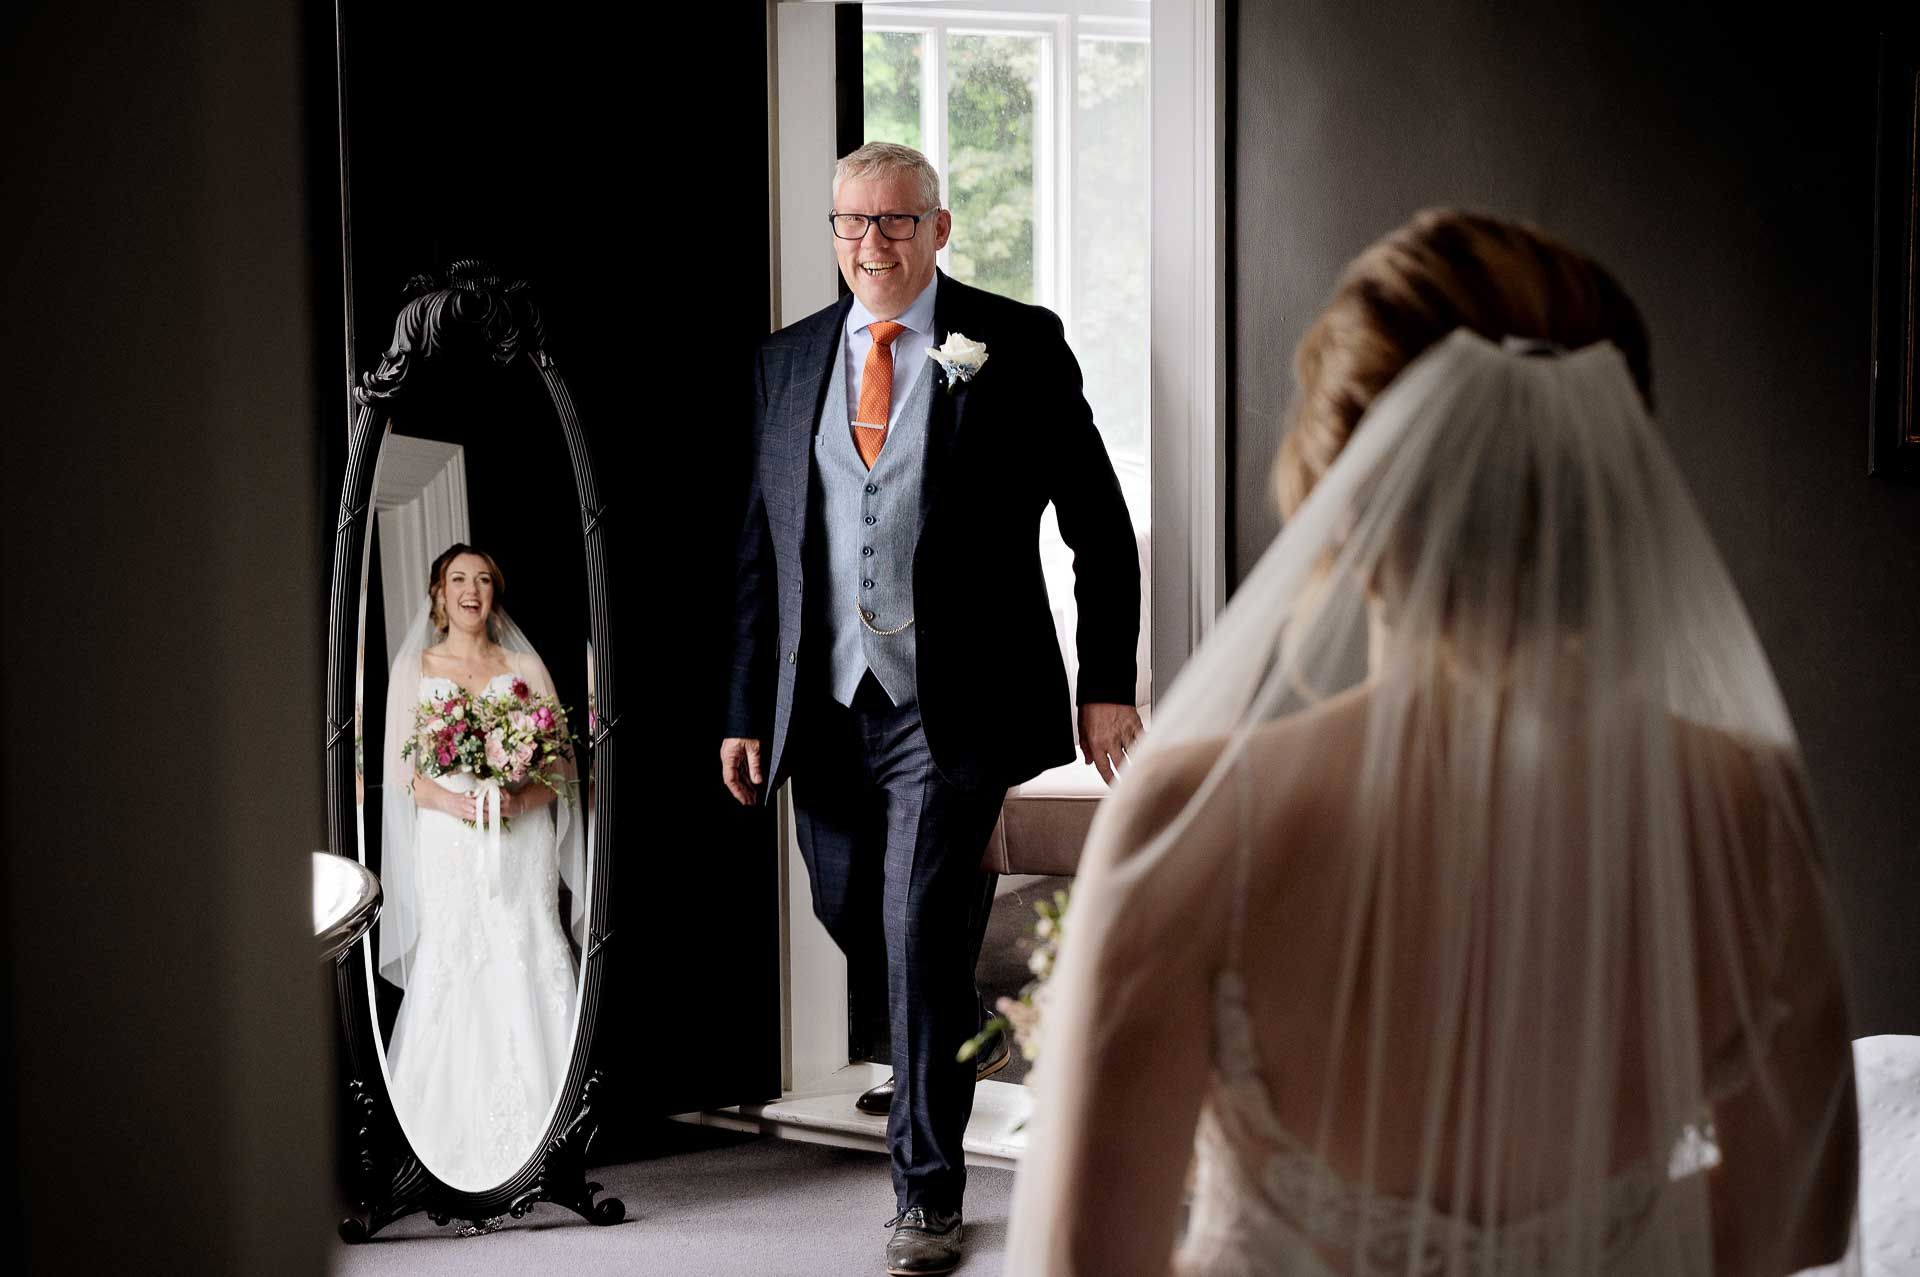 Sophie's Dad seeing her in her wedding dress for the first time at Swynford Manor. Sophie's reflection can be seen in the mirror, they are both grinning. Photography by Fountain Photography. Videography by Veiled Productions.